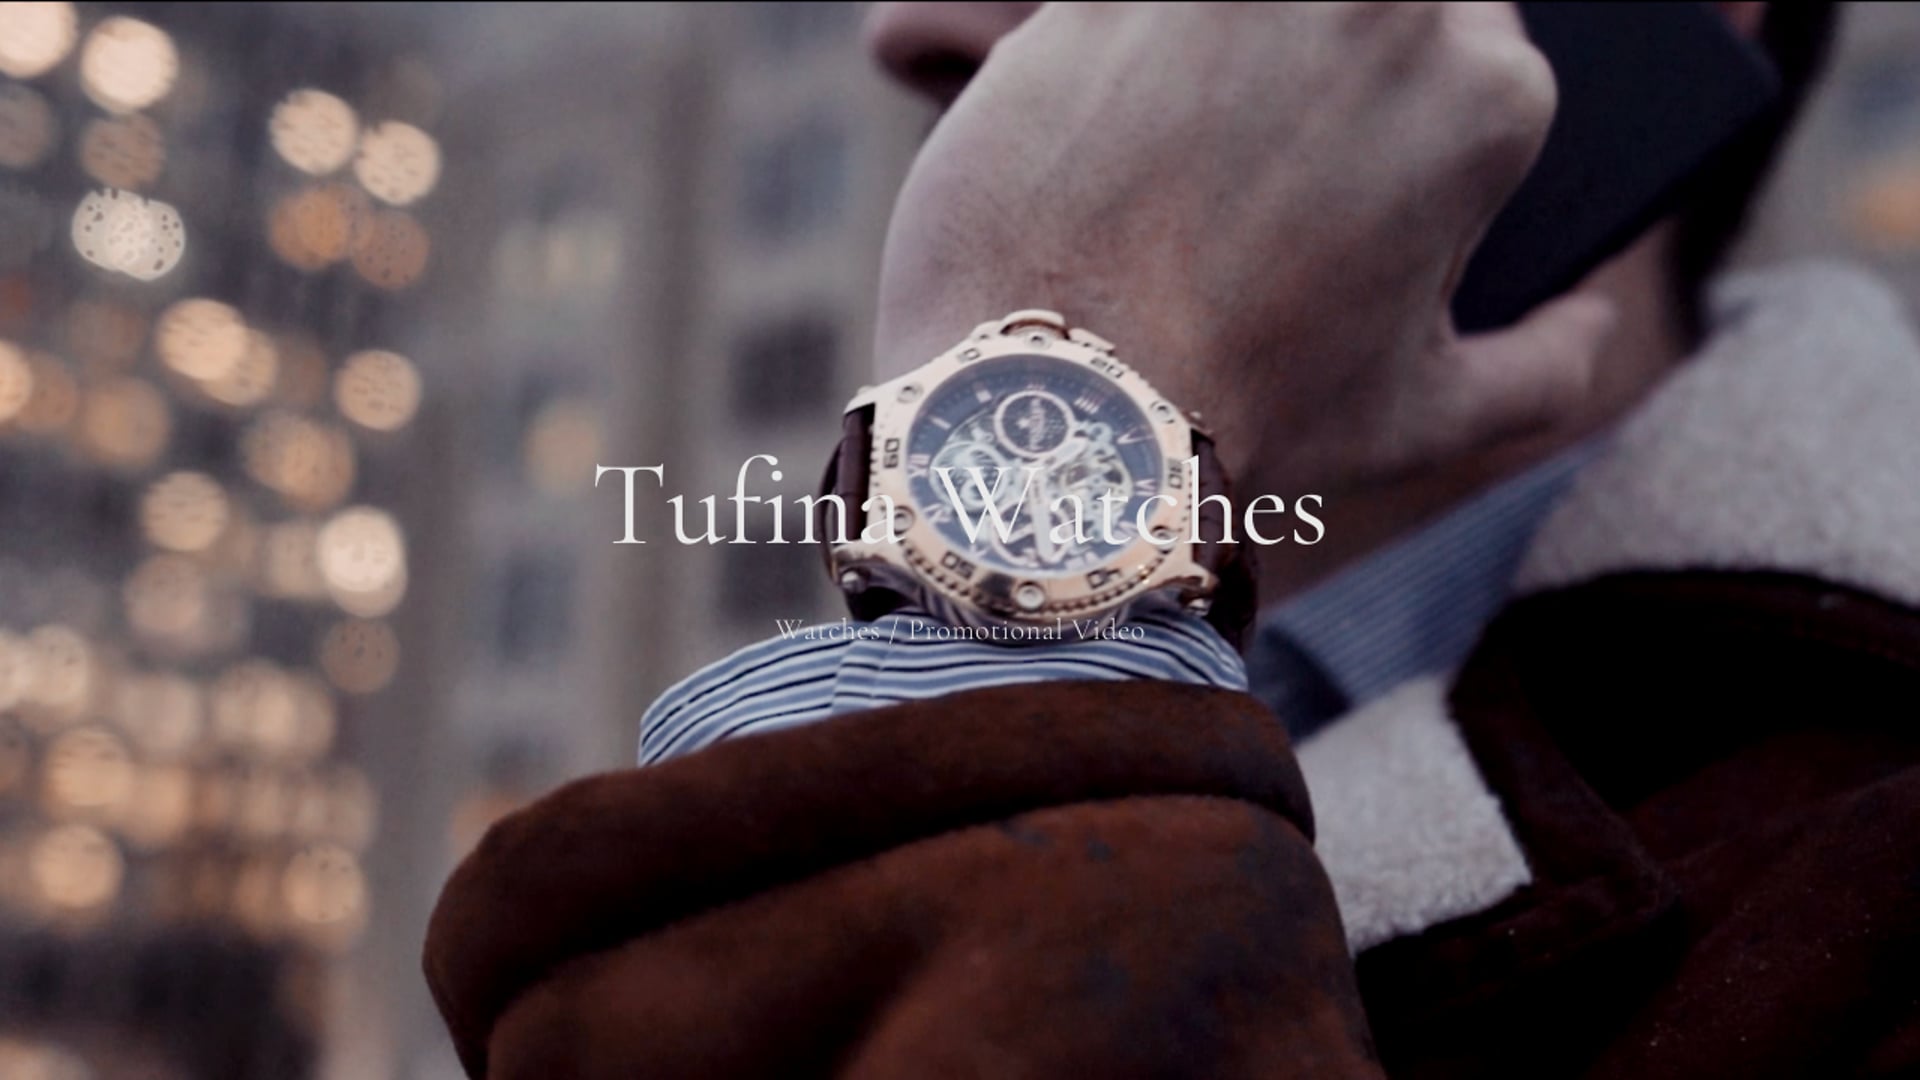 Tufina Watches / Promotional Video